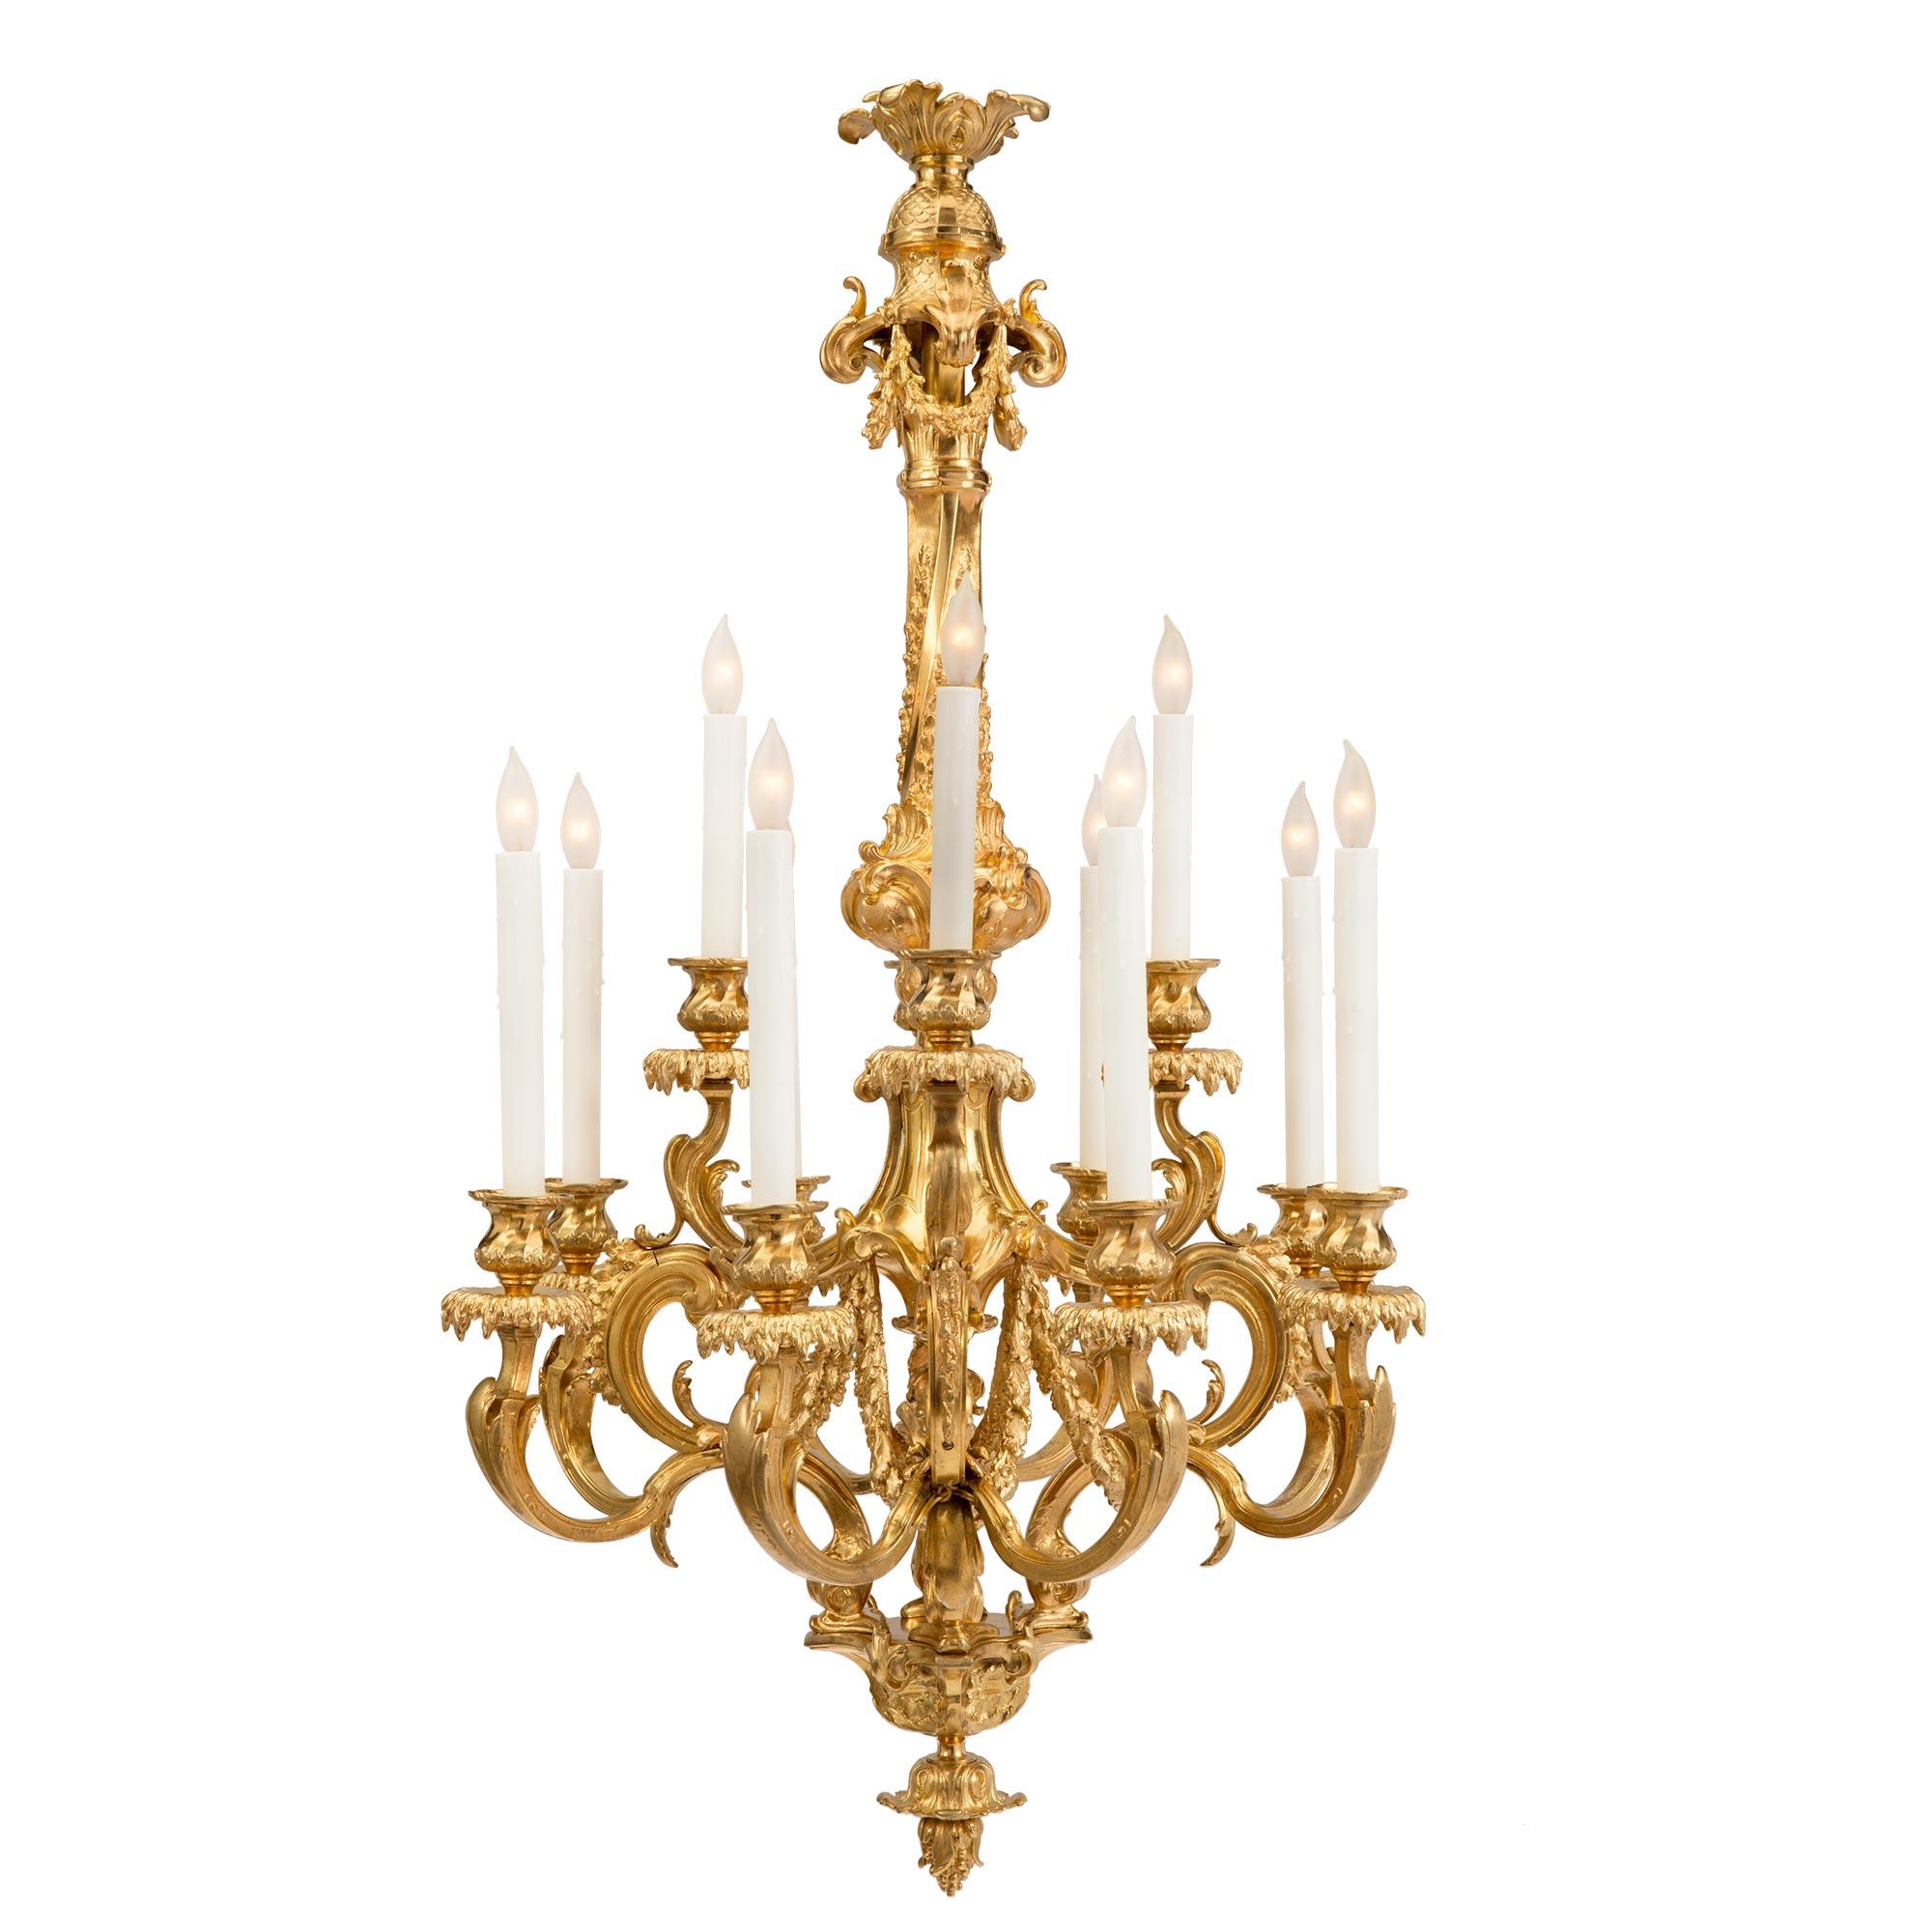 French 19th Century Louis XV Style Ormolu Twelve-Light Chandelier In Good Condition For Sale In West Palm Beach, FL